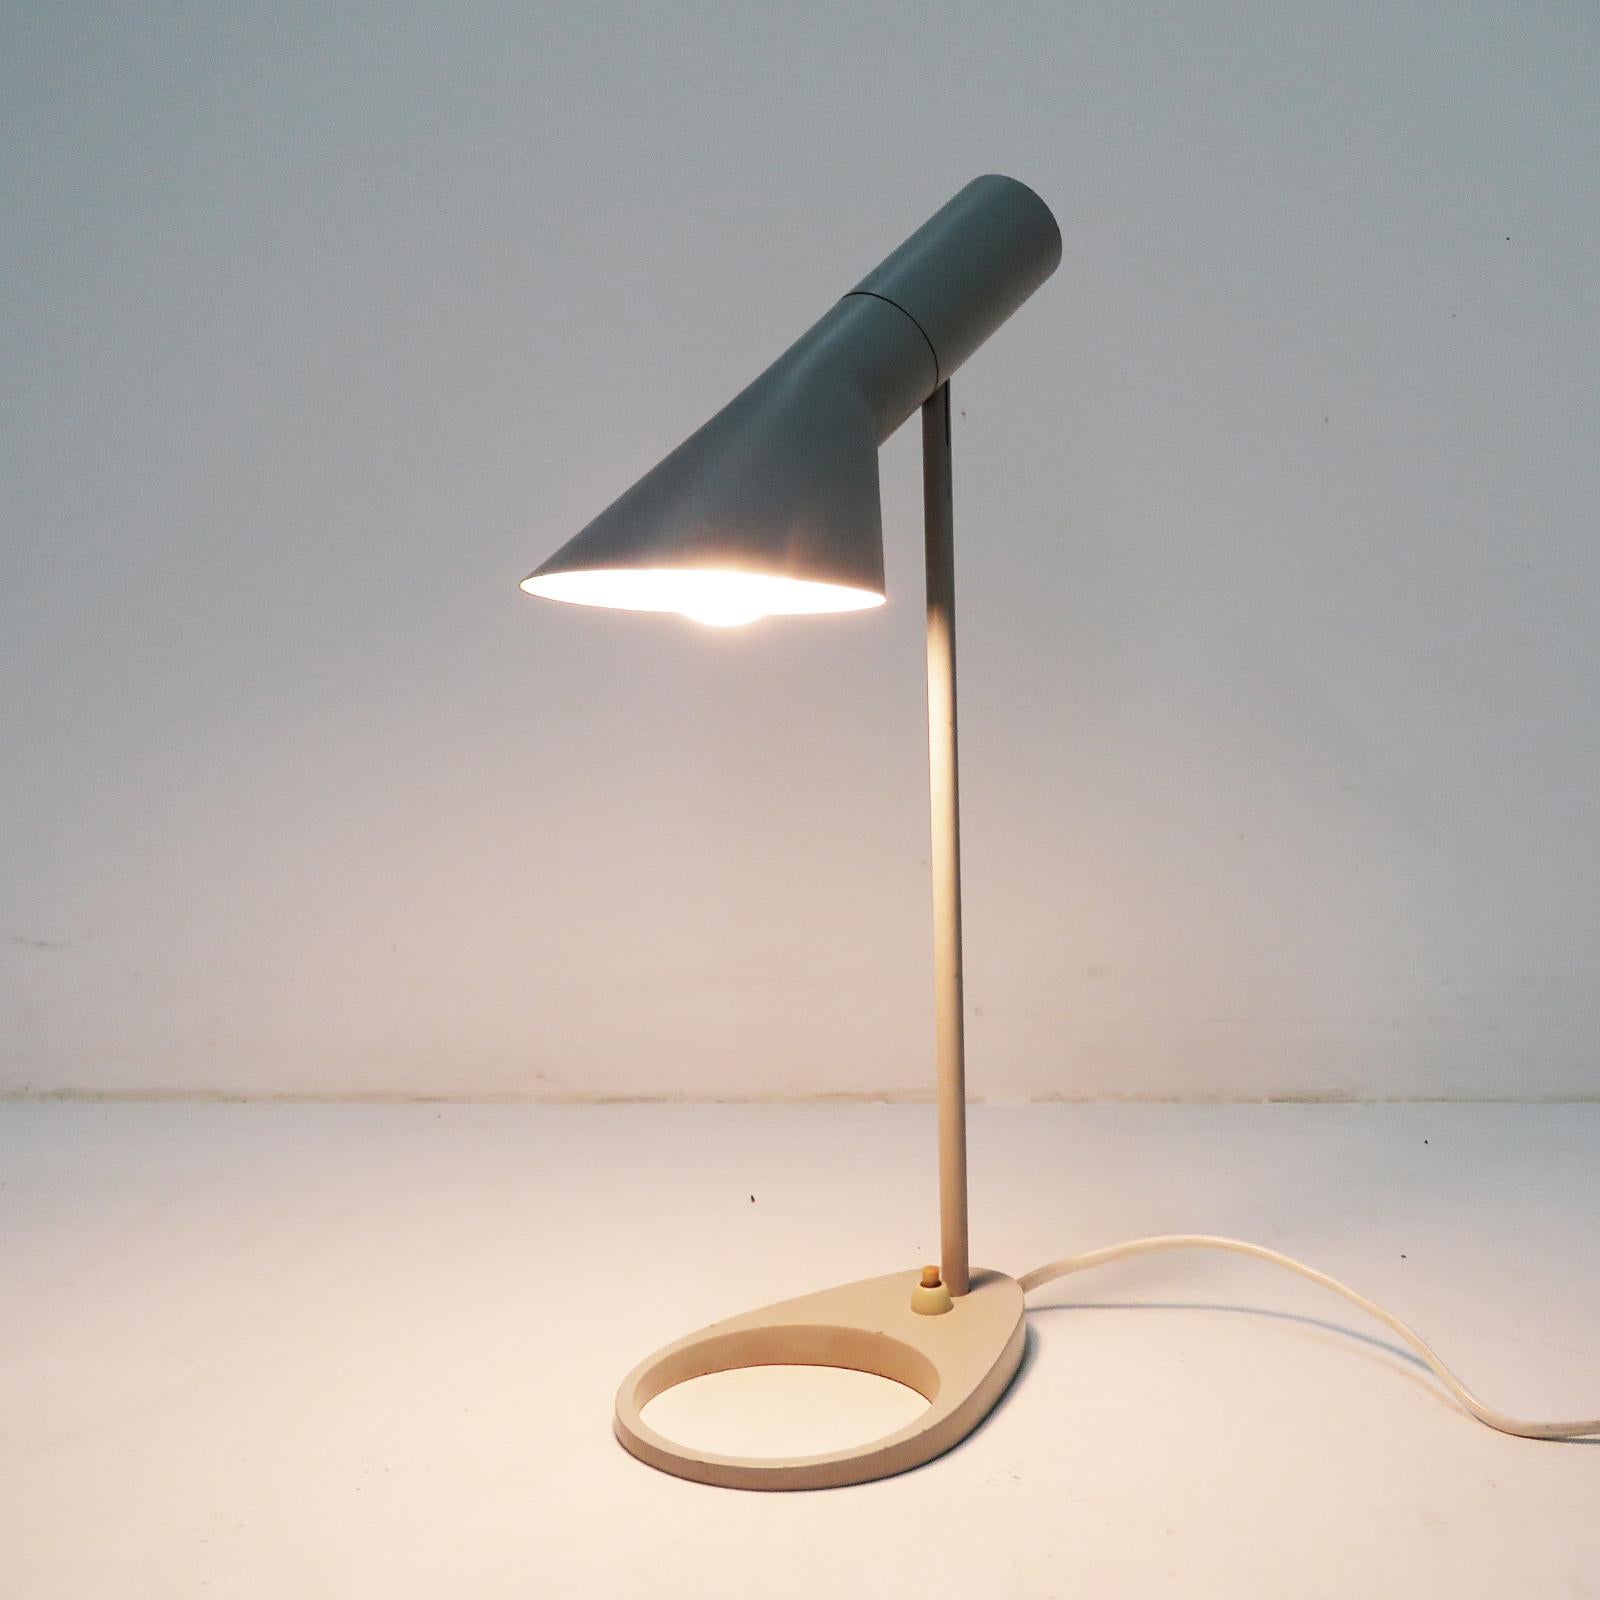 Rare Arne Jacobsen 'AJ' Desk Lamp, 1957 In Good Condition For Sale In Los Angeles, CA